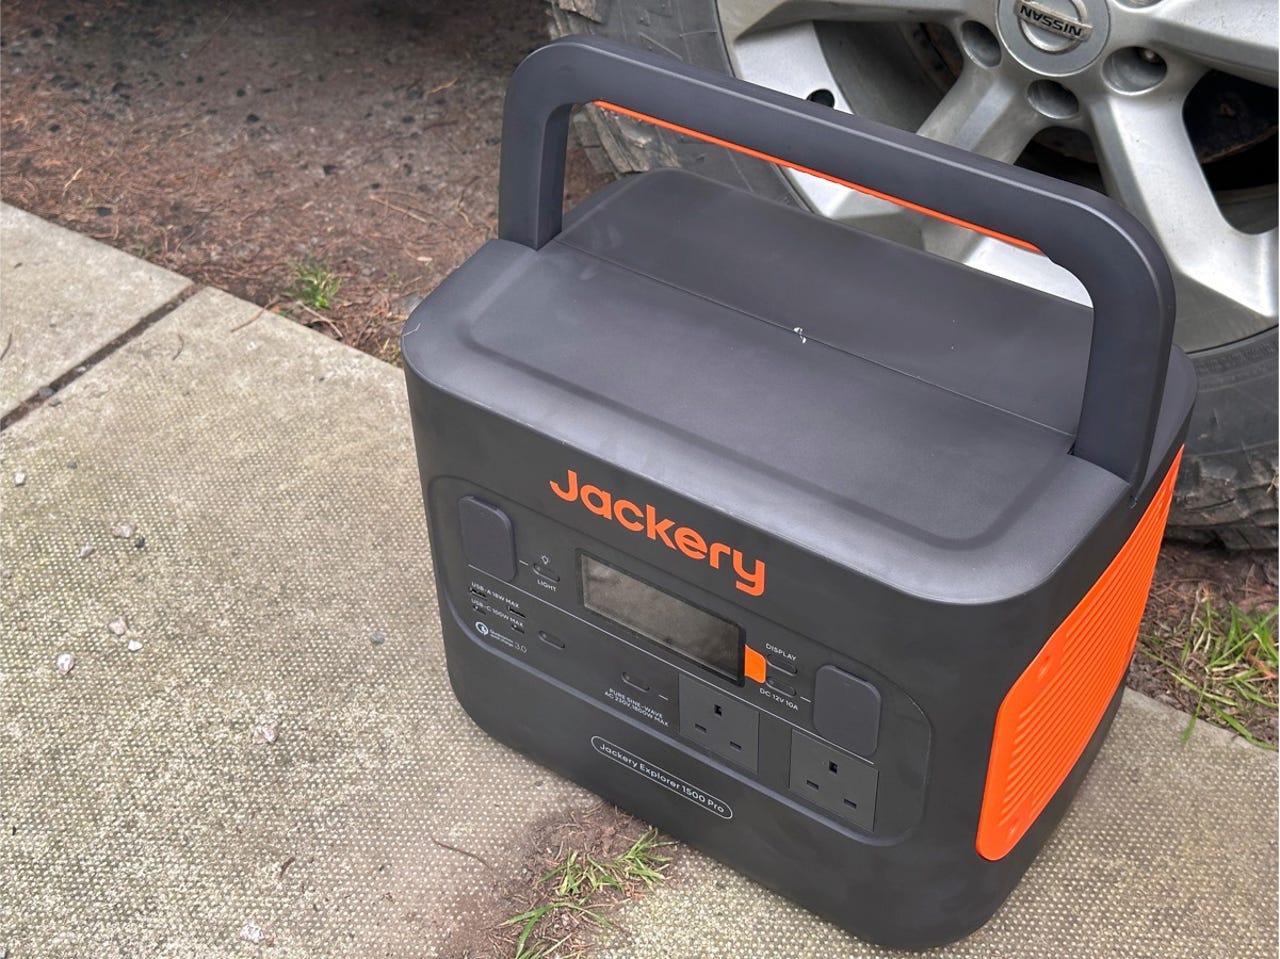 The Jackery Explorer 1500 Pro portable with the handle lifted, outdoors next to a car